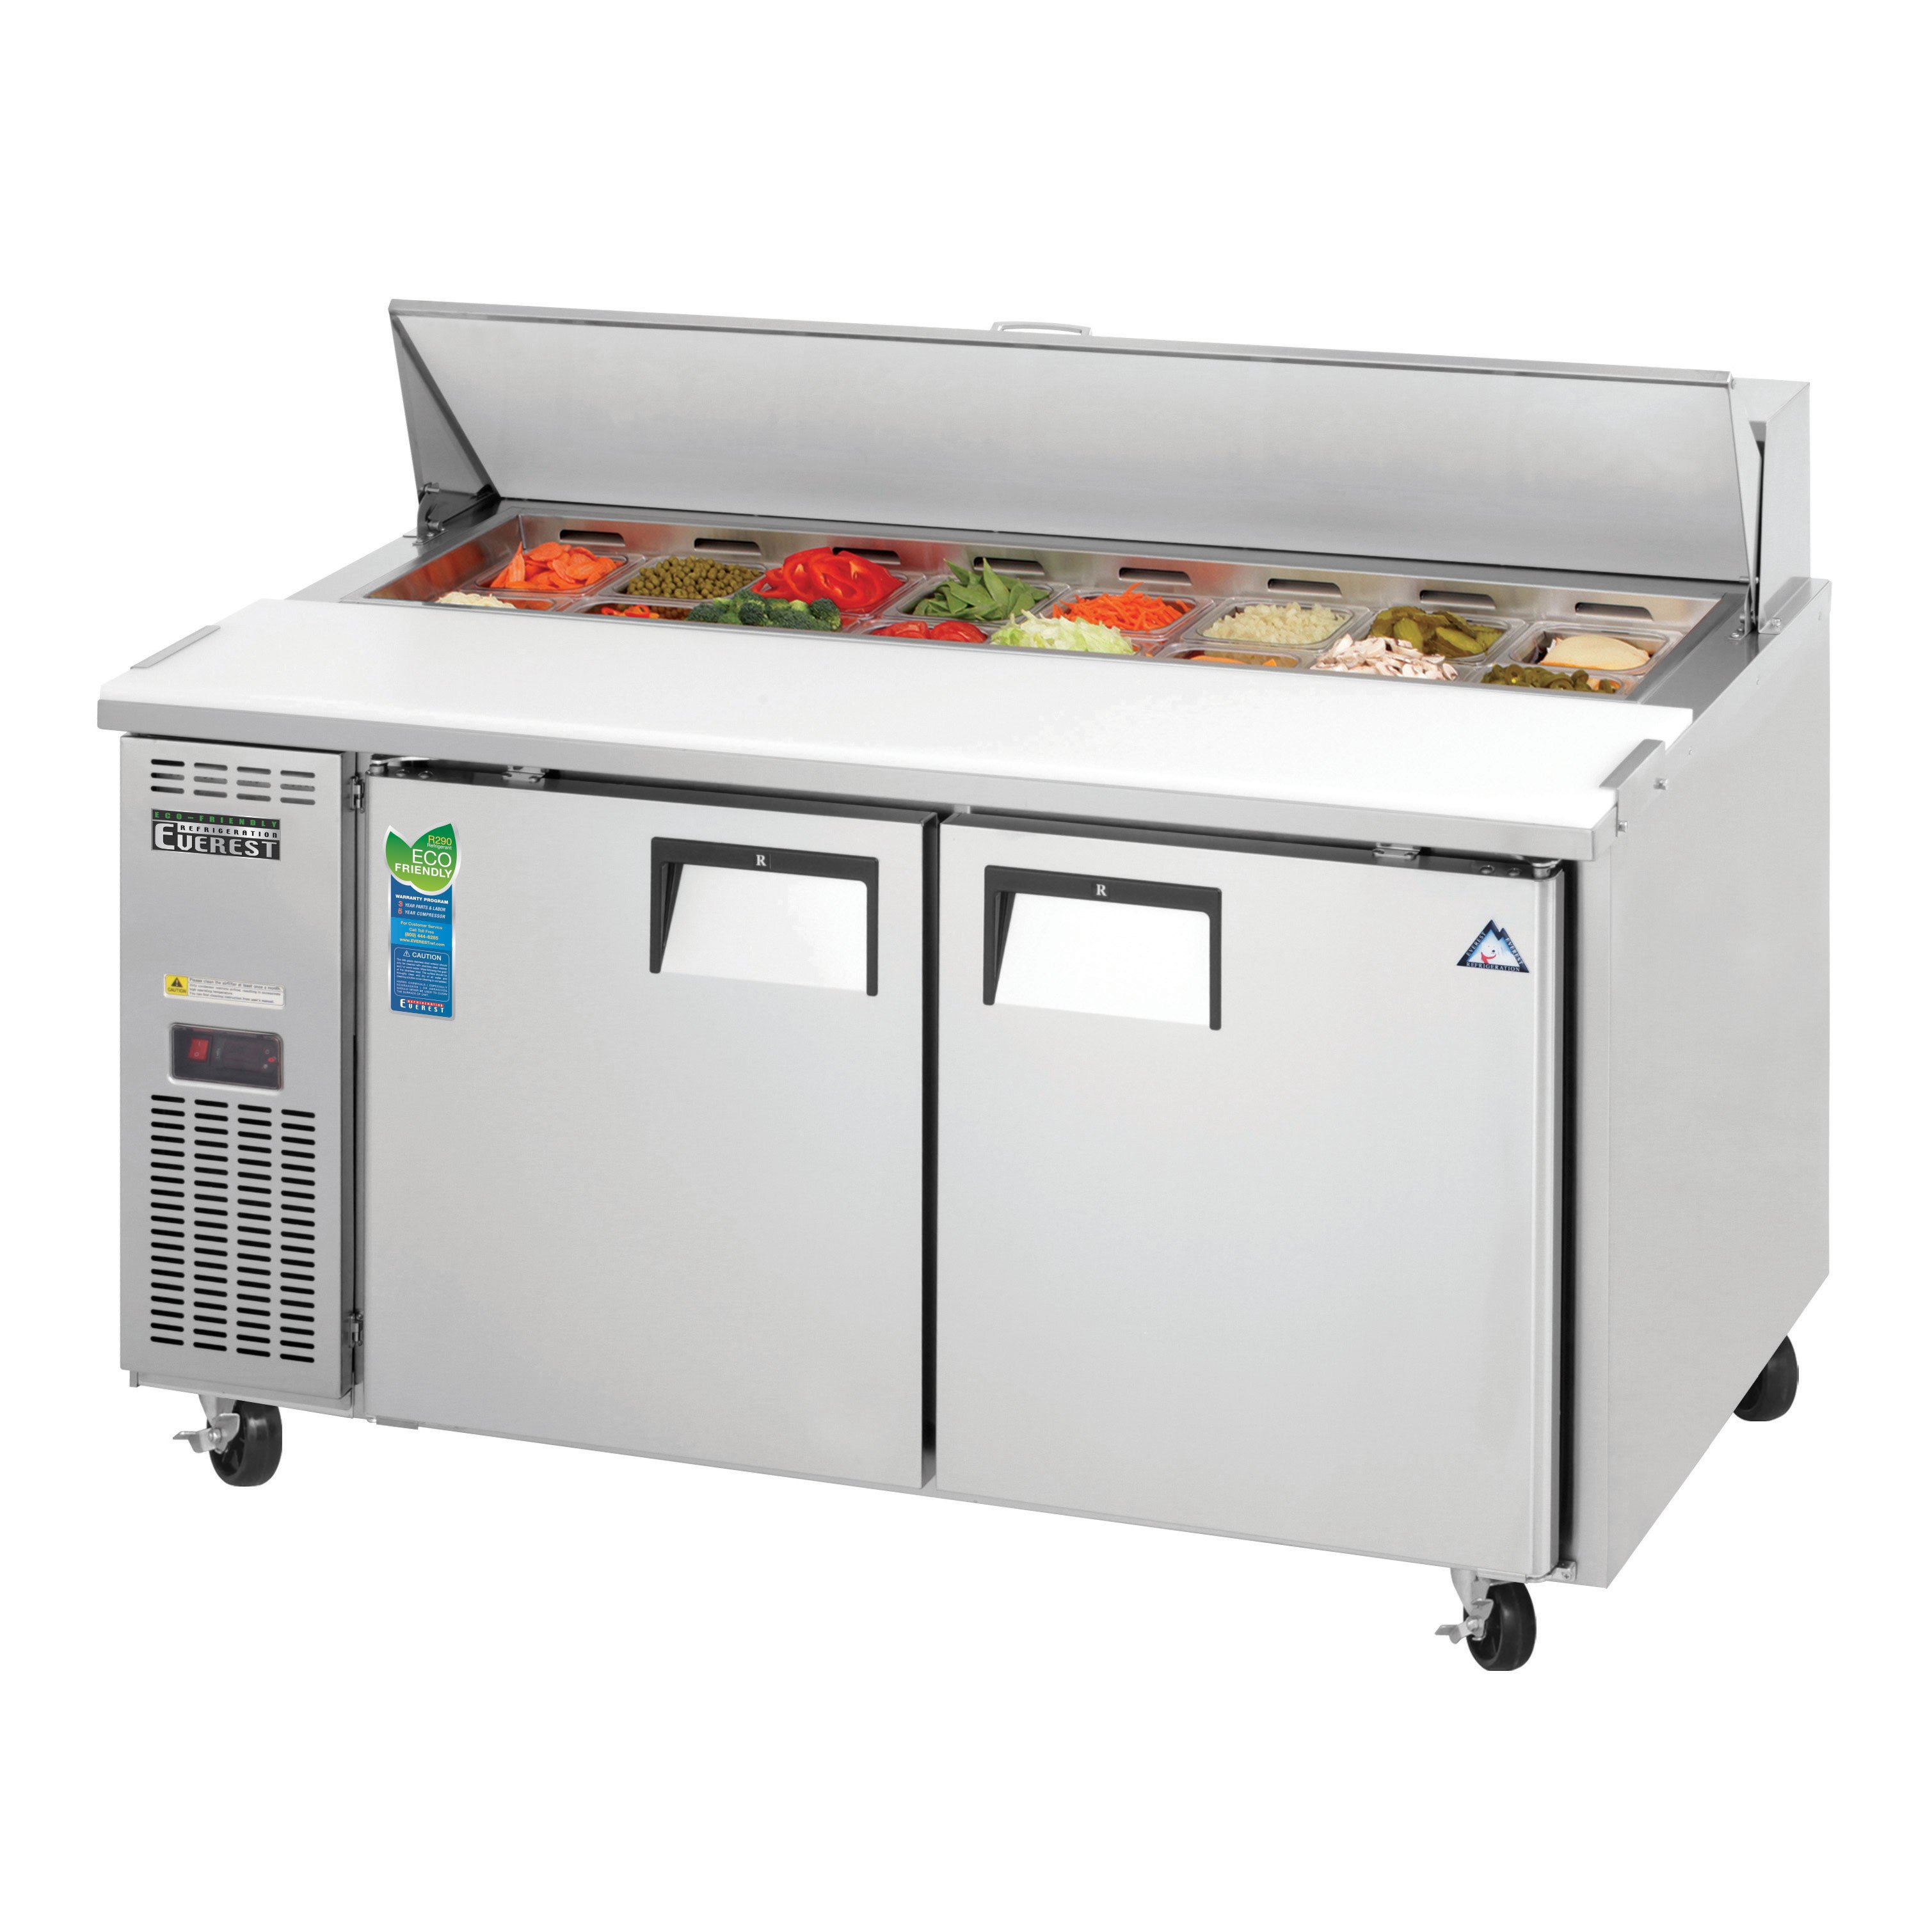 Everest EPWR2 59″ Two Section Sandwich Salad Prep Table, 17.0 cu. ft.